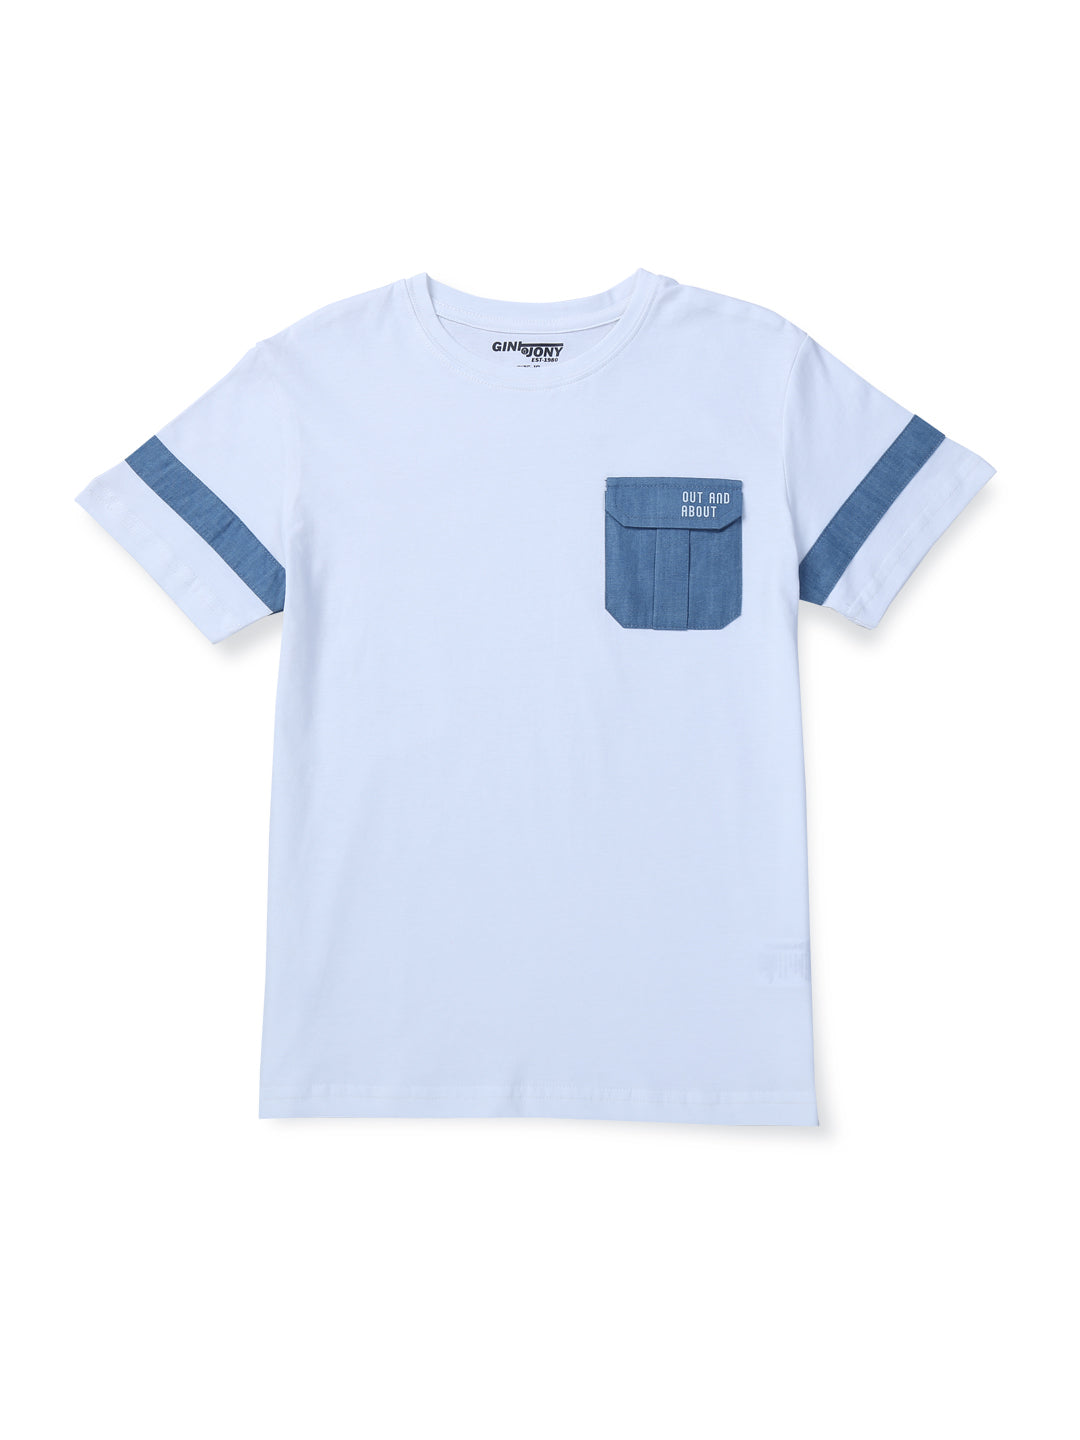 Boys White Cotton Solid T-Shirt